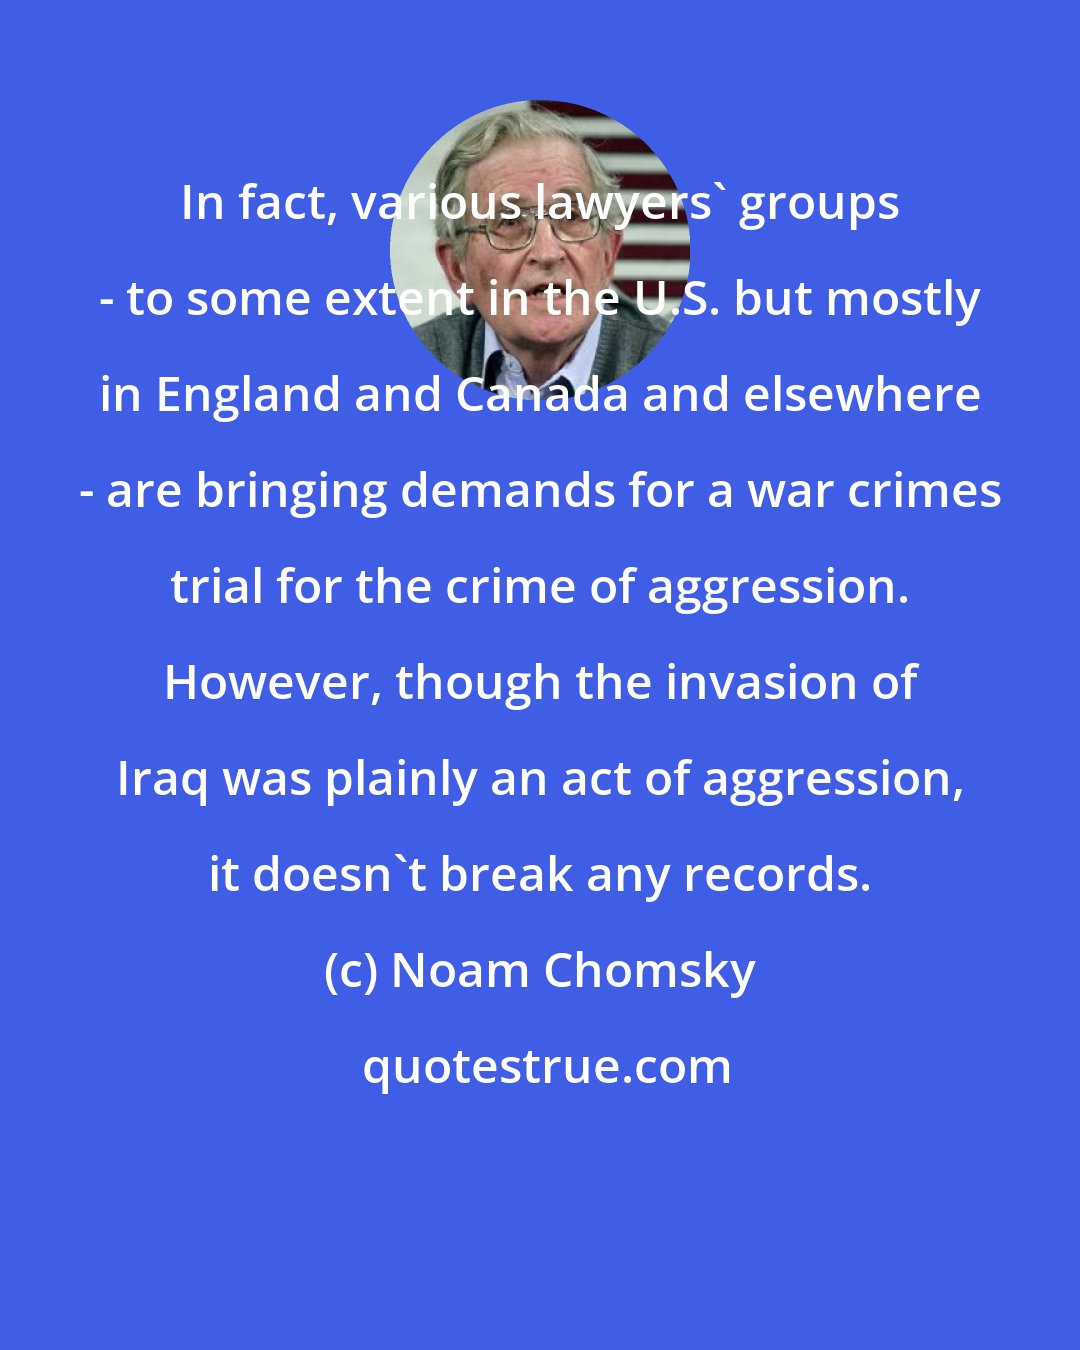 Noam Chomsky: In fact, various lawyers' groups - to some extent in the U.S. but mostly in England and Canada and elsewhere - are bringing demands for a war crimes trial for the crime of aggression. However, though the invasion of Iraq was plainly an act of aggression, it doesn't break any records.